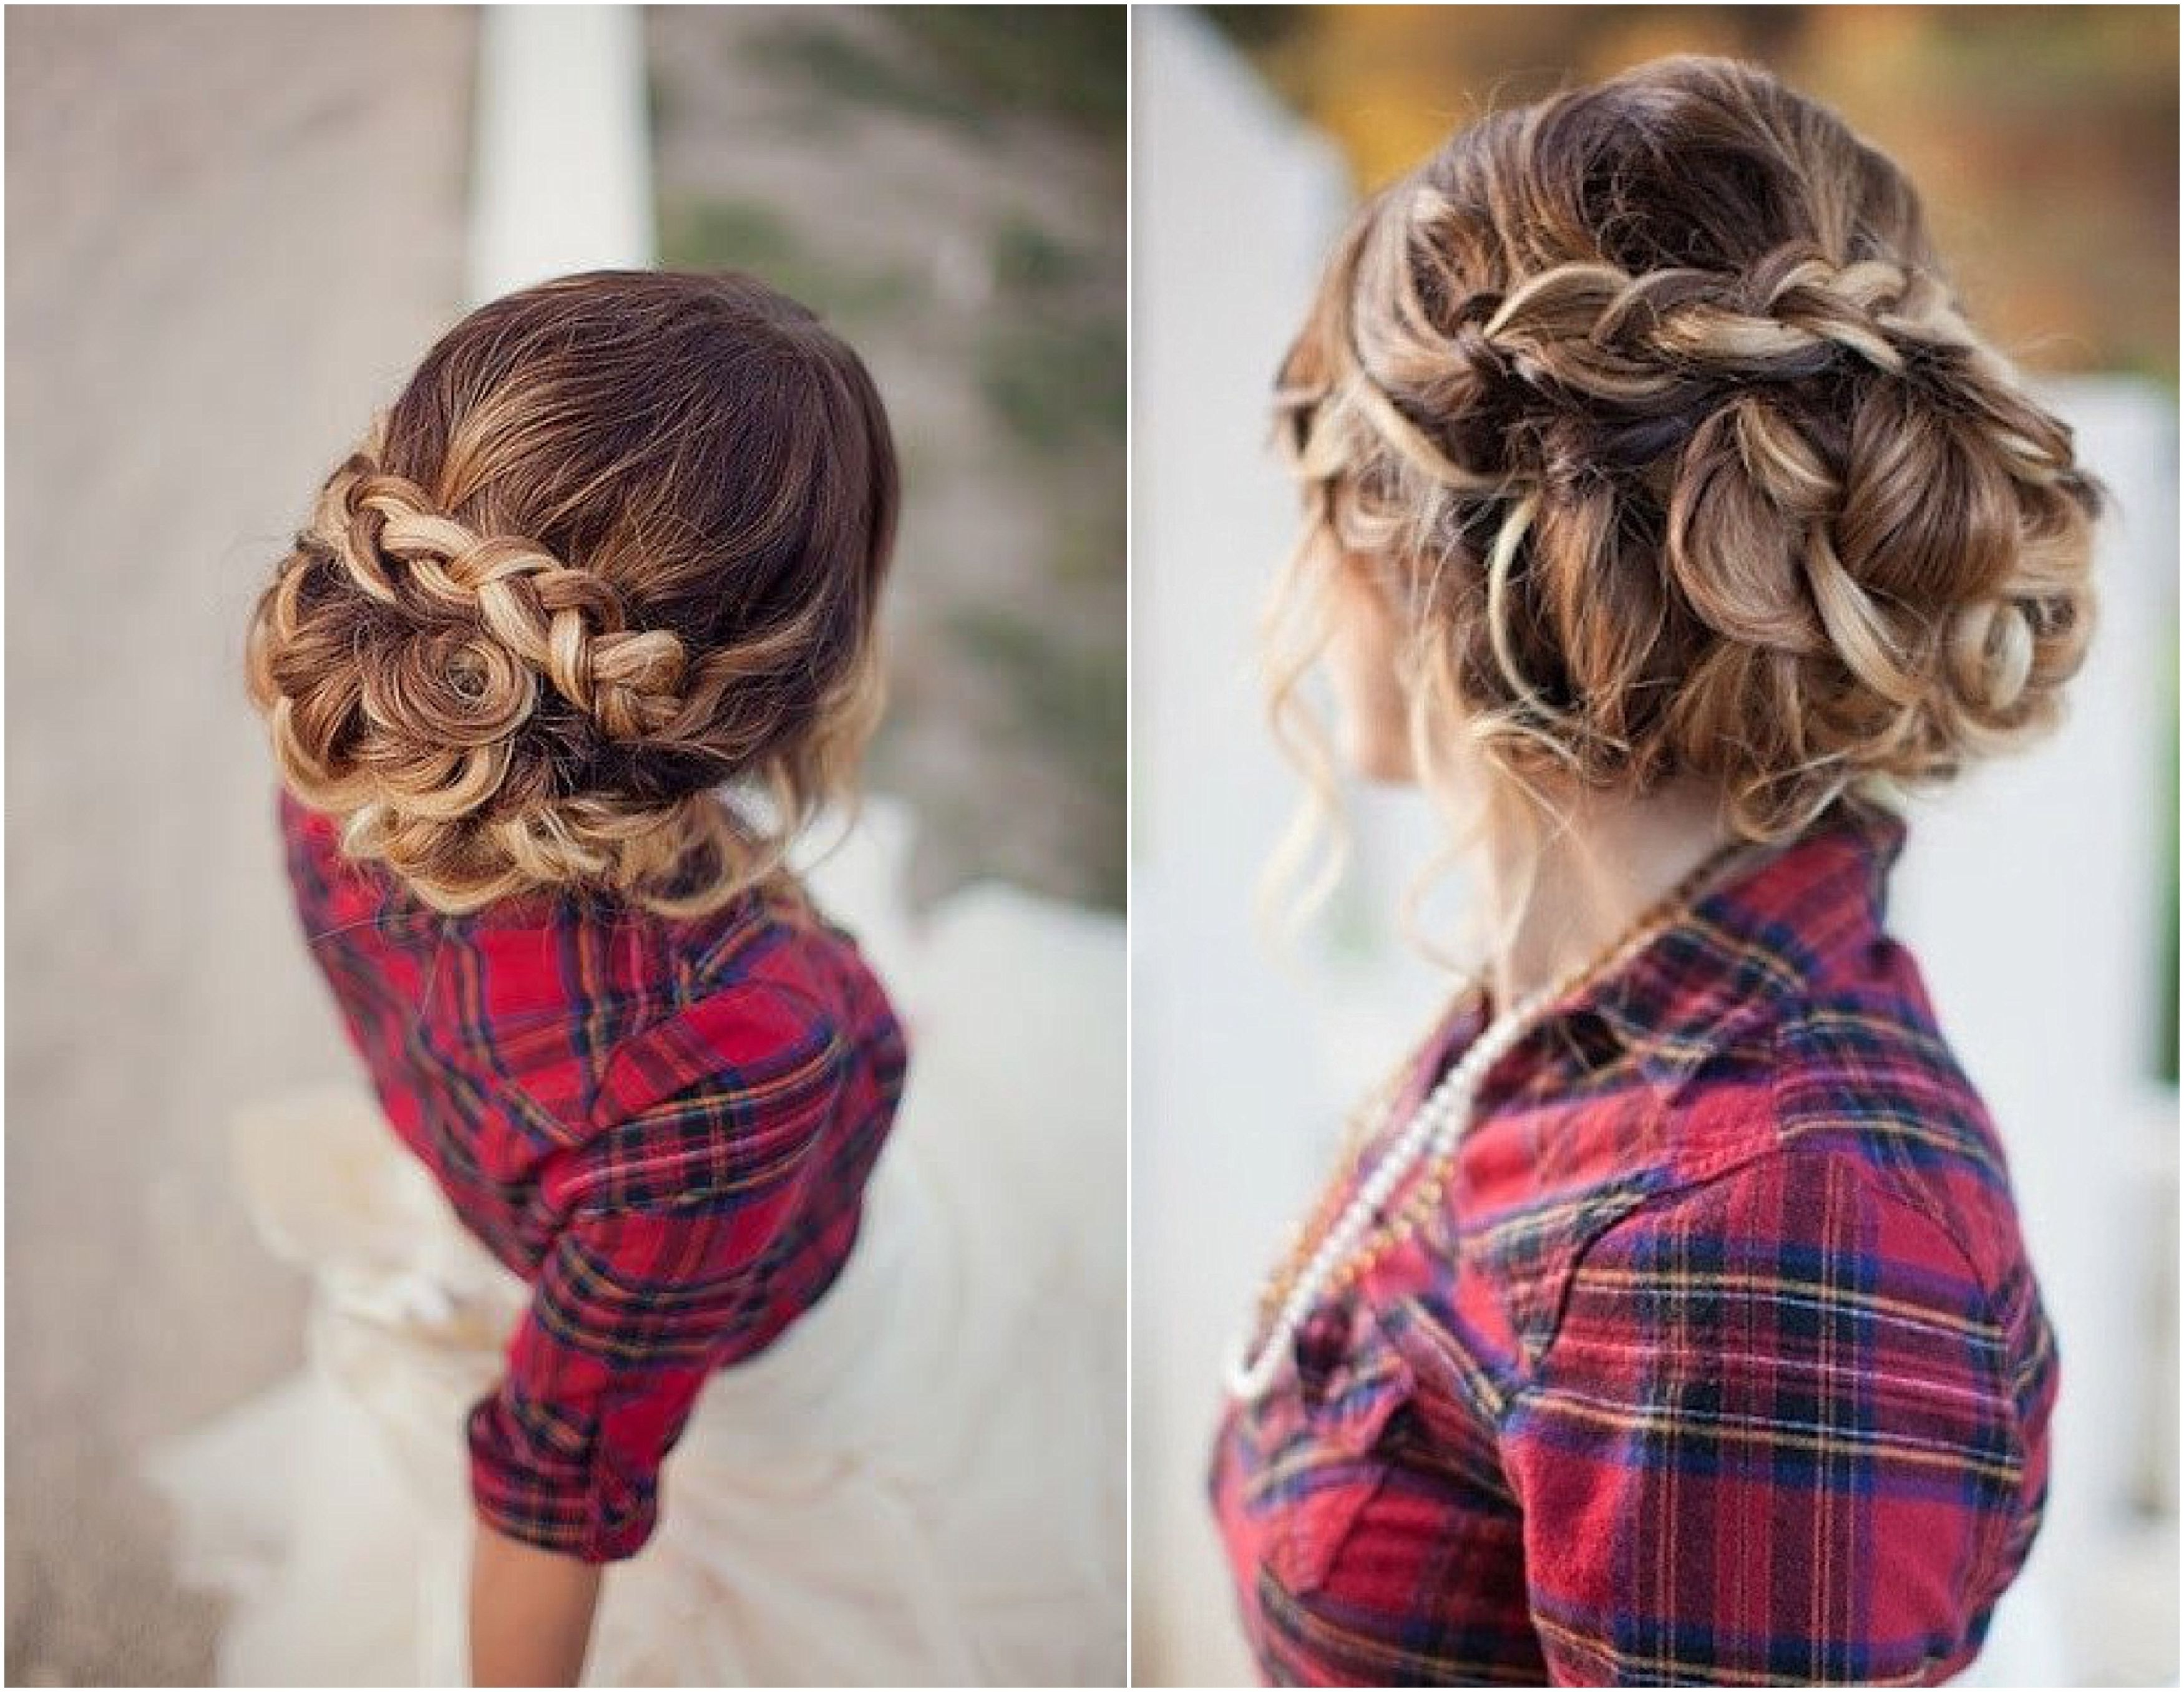 Optimum Braided Wedding Hairstyles Visuals – Feilong In Current Country Wedding Hairstyles For Bridesmaids (View 6 of 15)